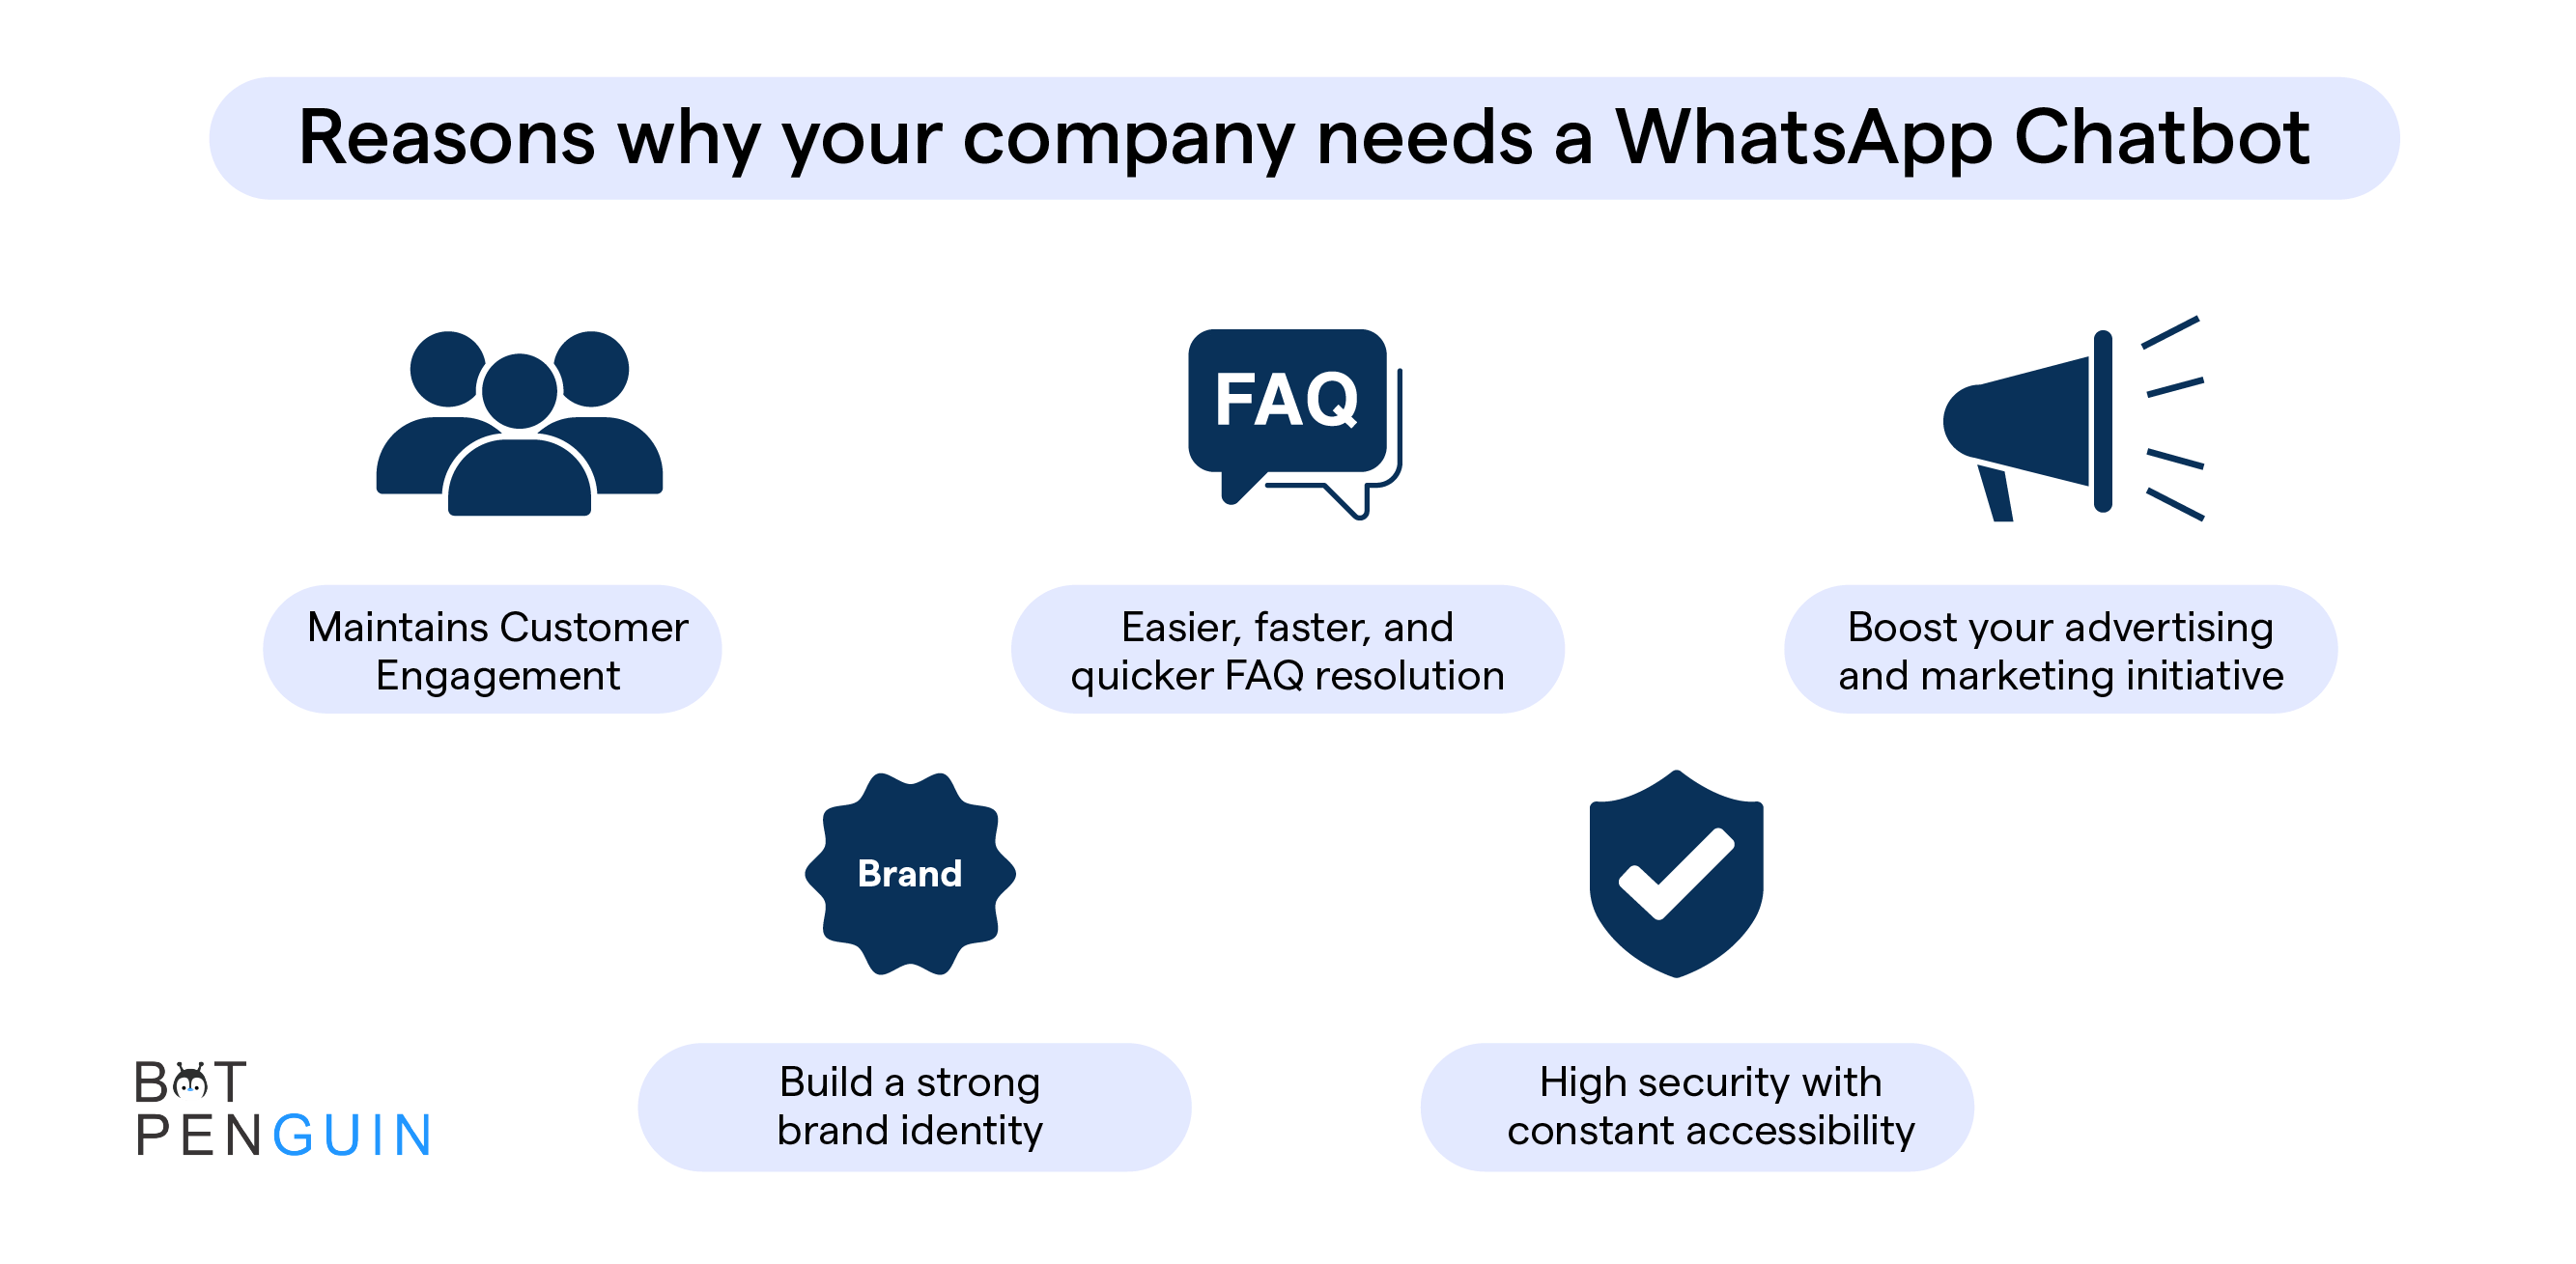 Reasons why your company needs a WhatsApp Chatbot.